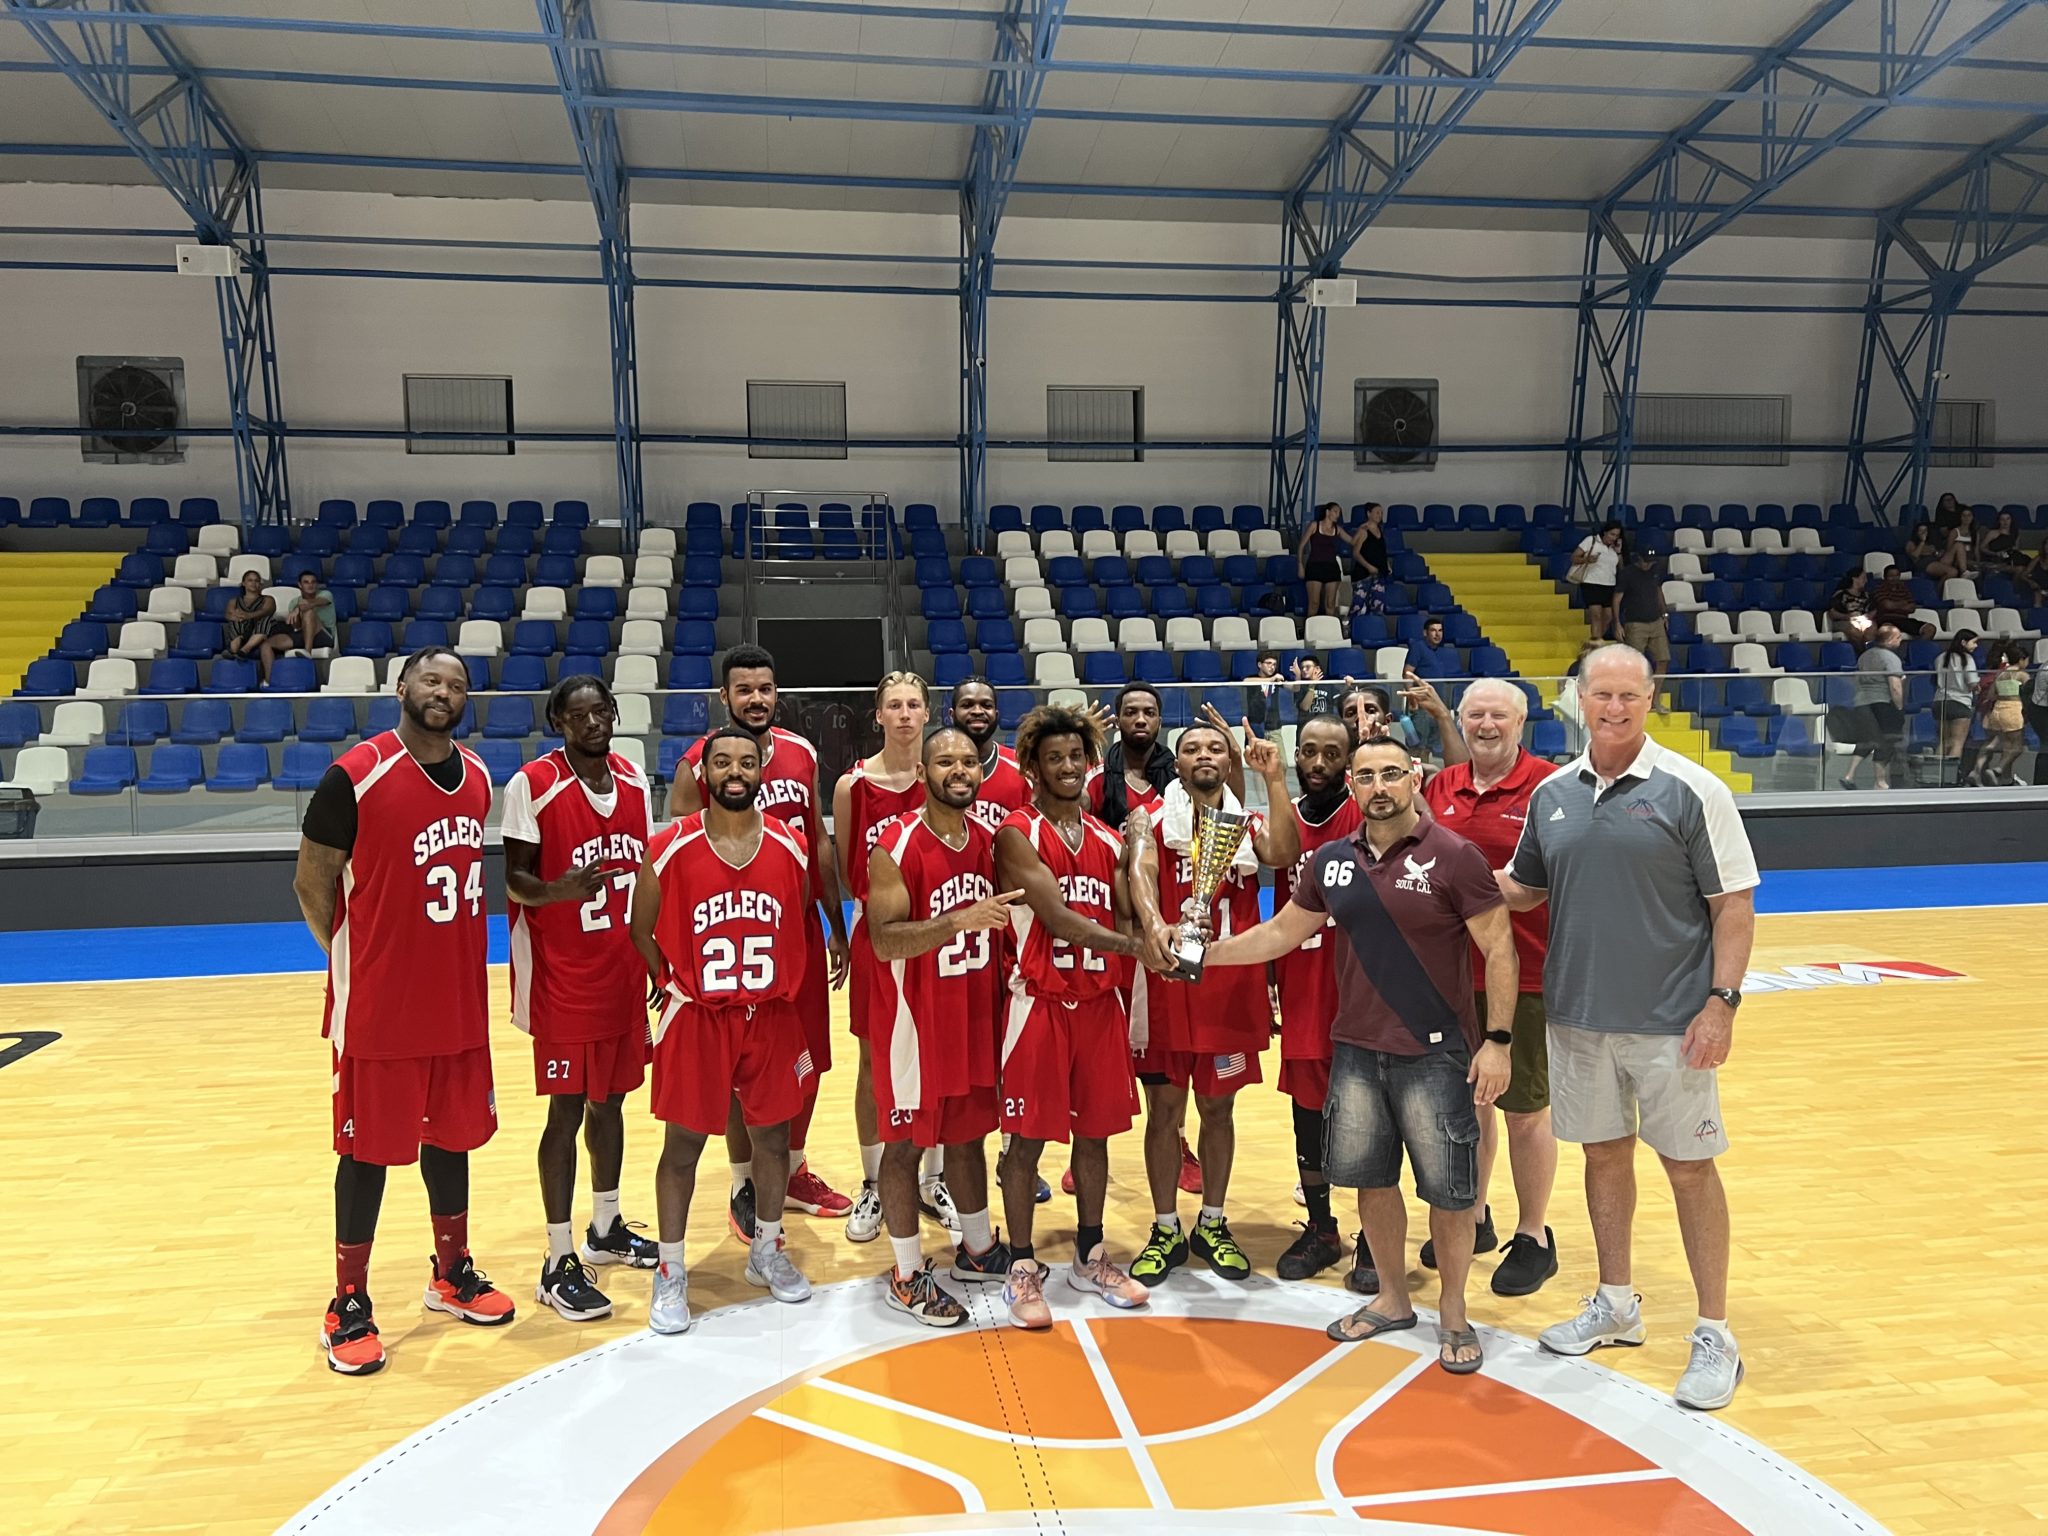 The USA Select team were presented the winners' trophy for the Elite Basketball Tournament held in Malta.